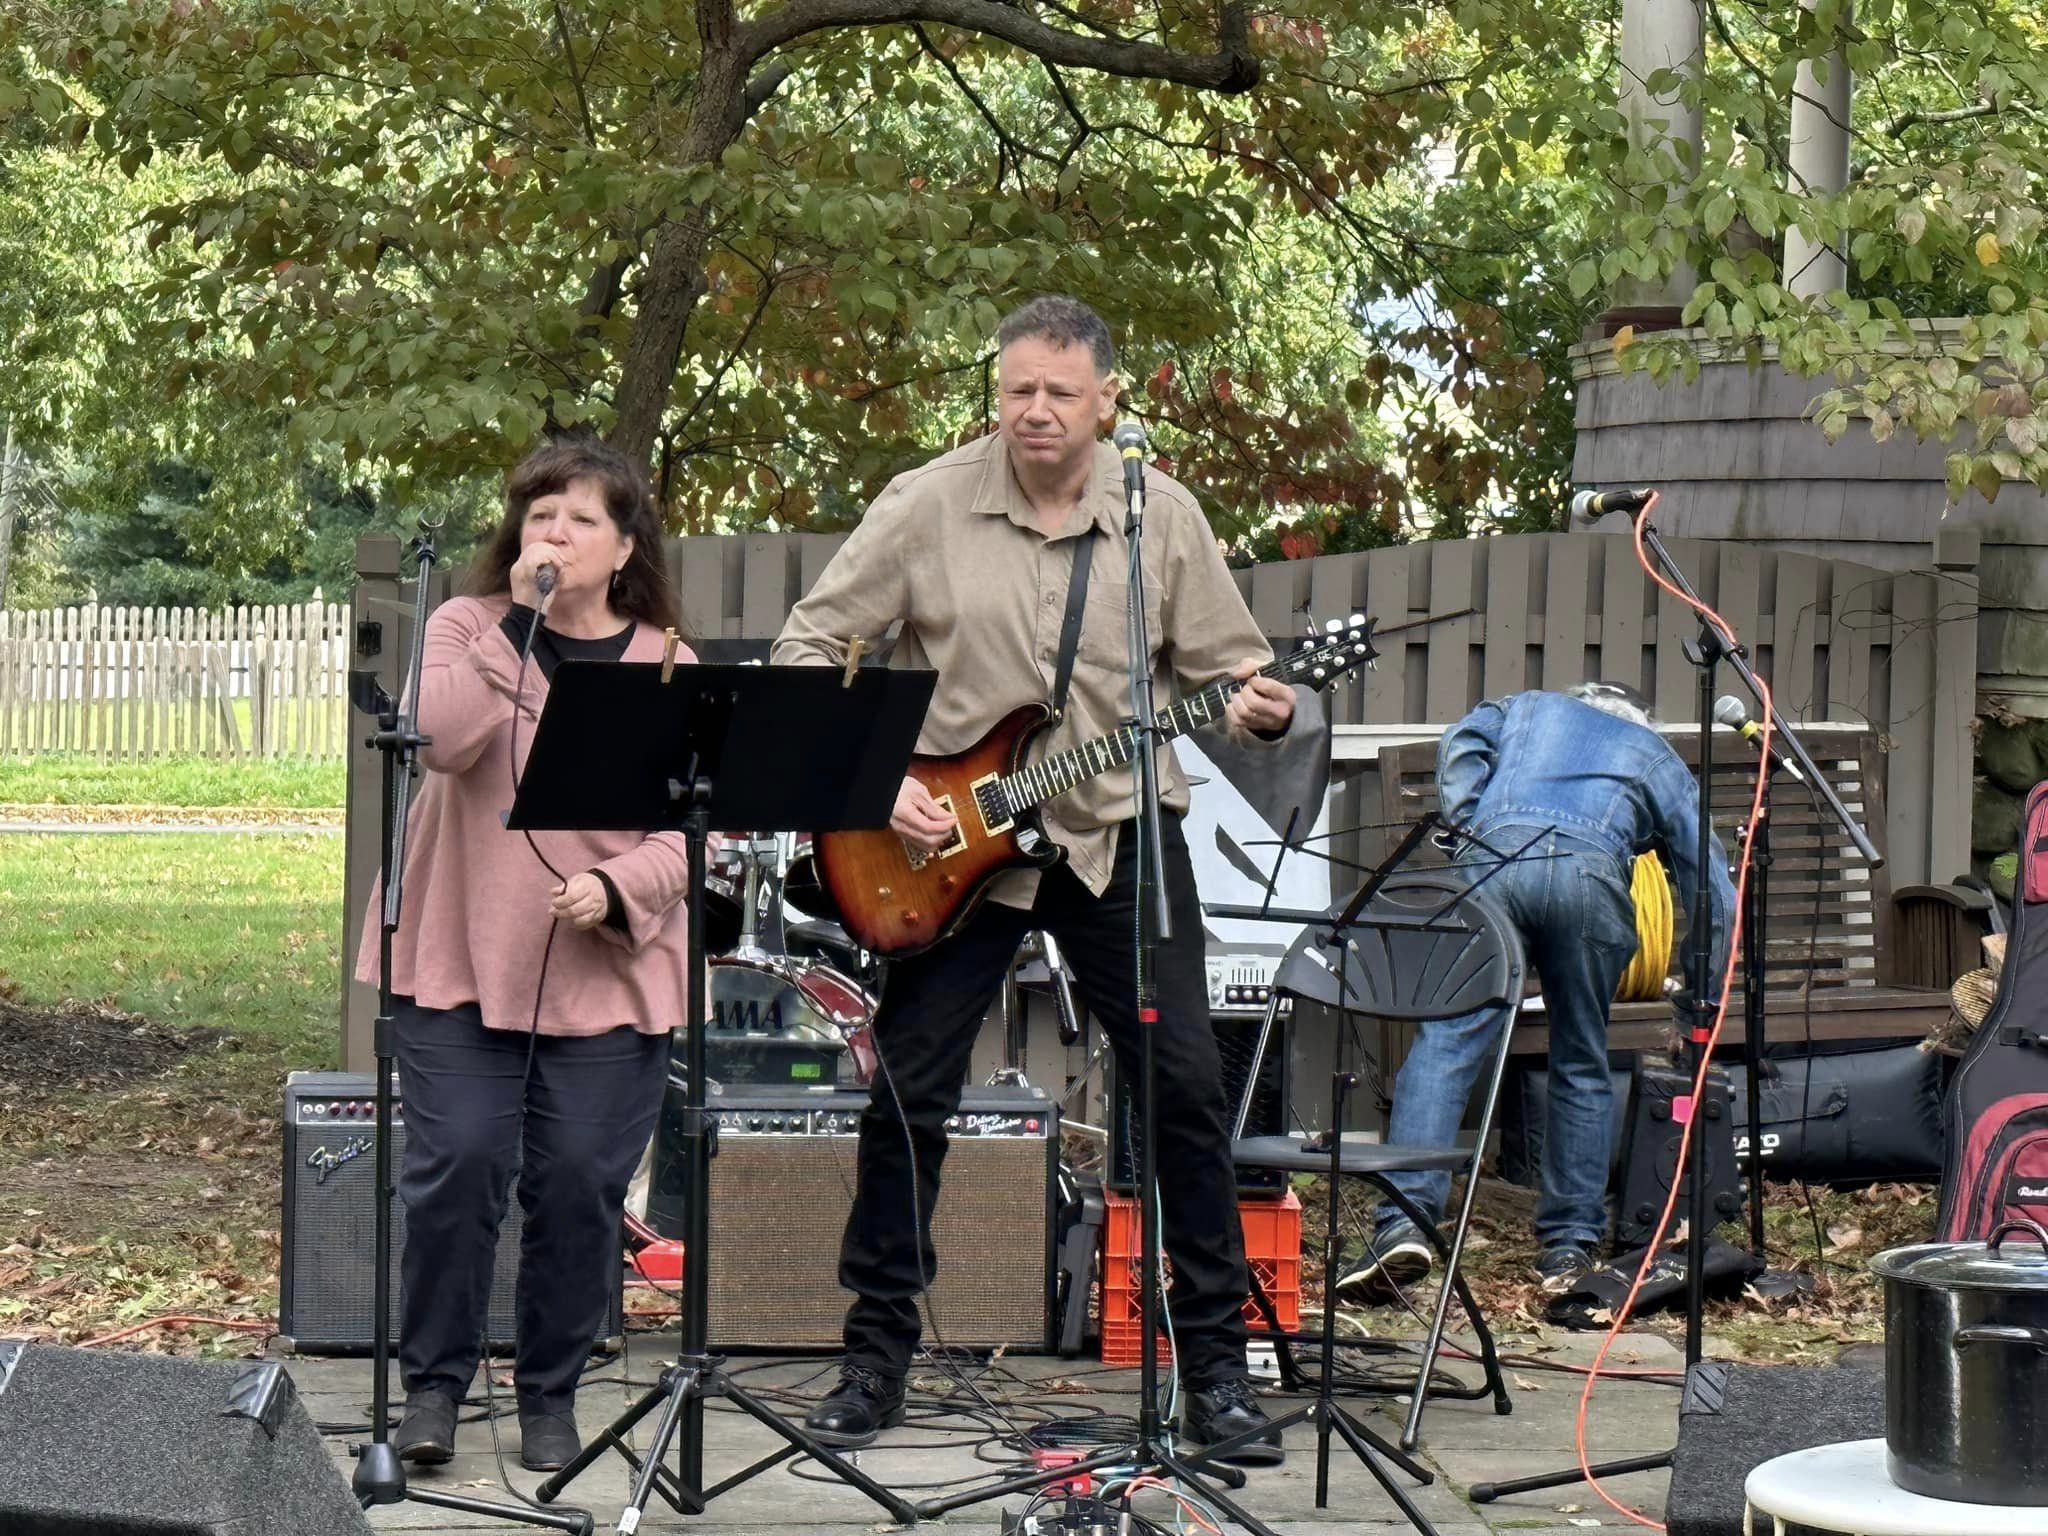 Leslie Masuzzo with Jason Didner accompanying on guitar at Parents Who Rock Backyard Benefit Concert 2023 in Montclair, NJ